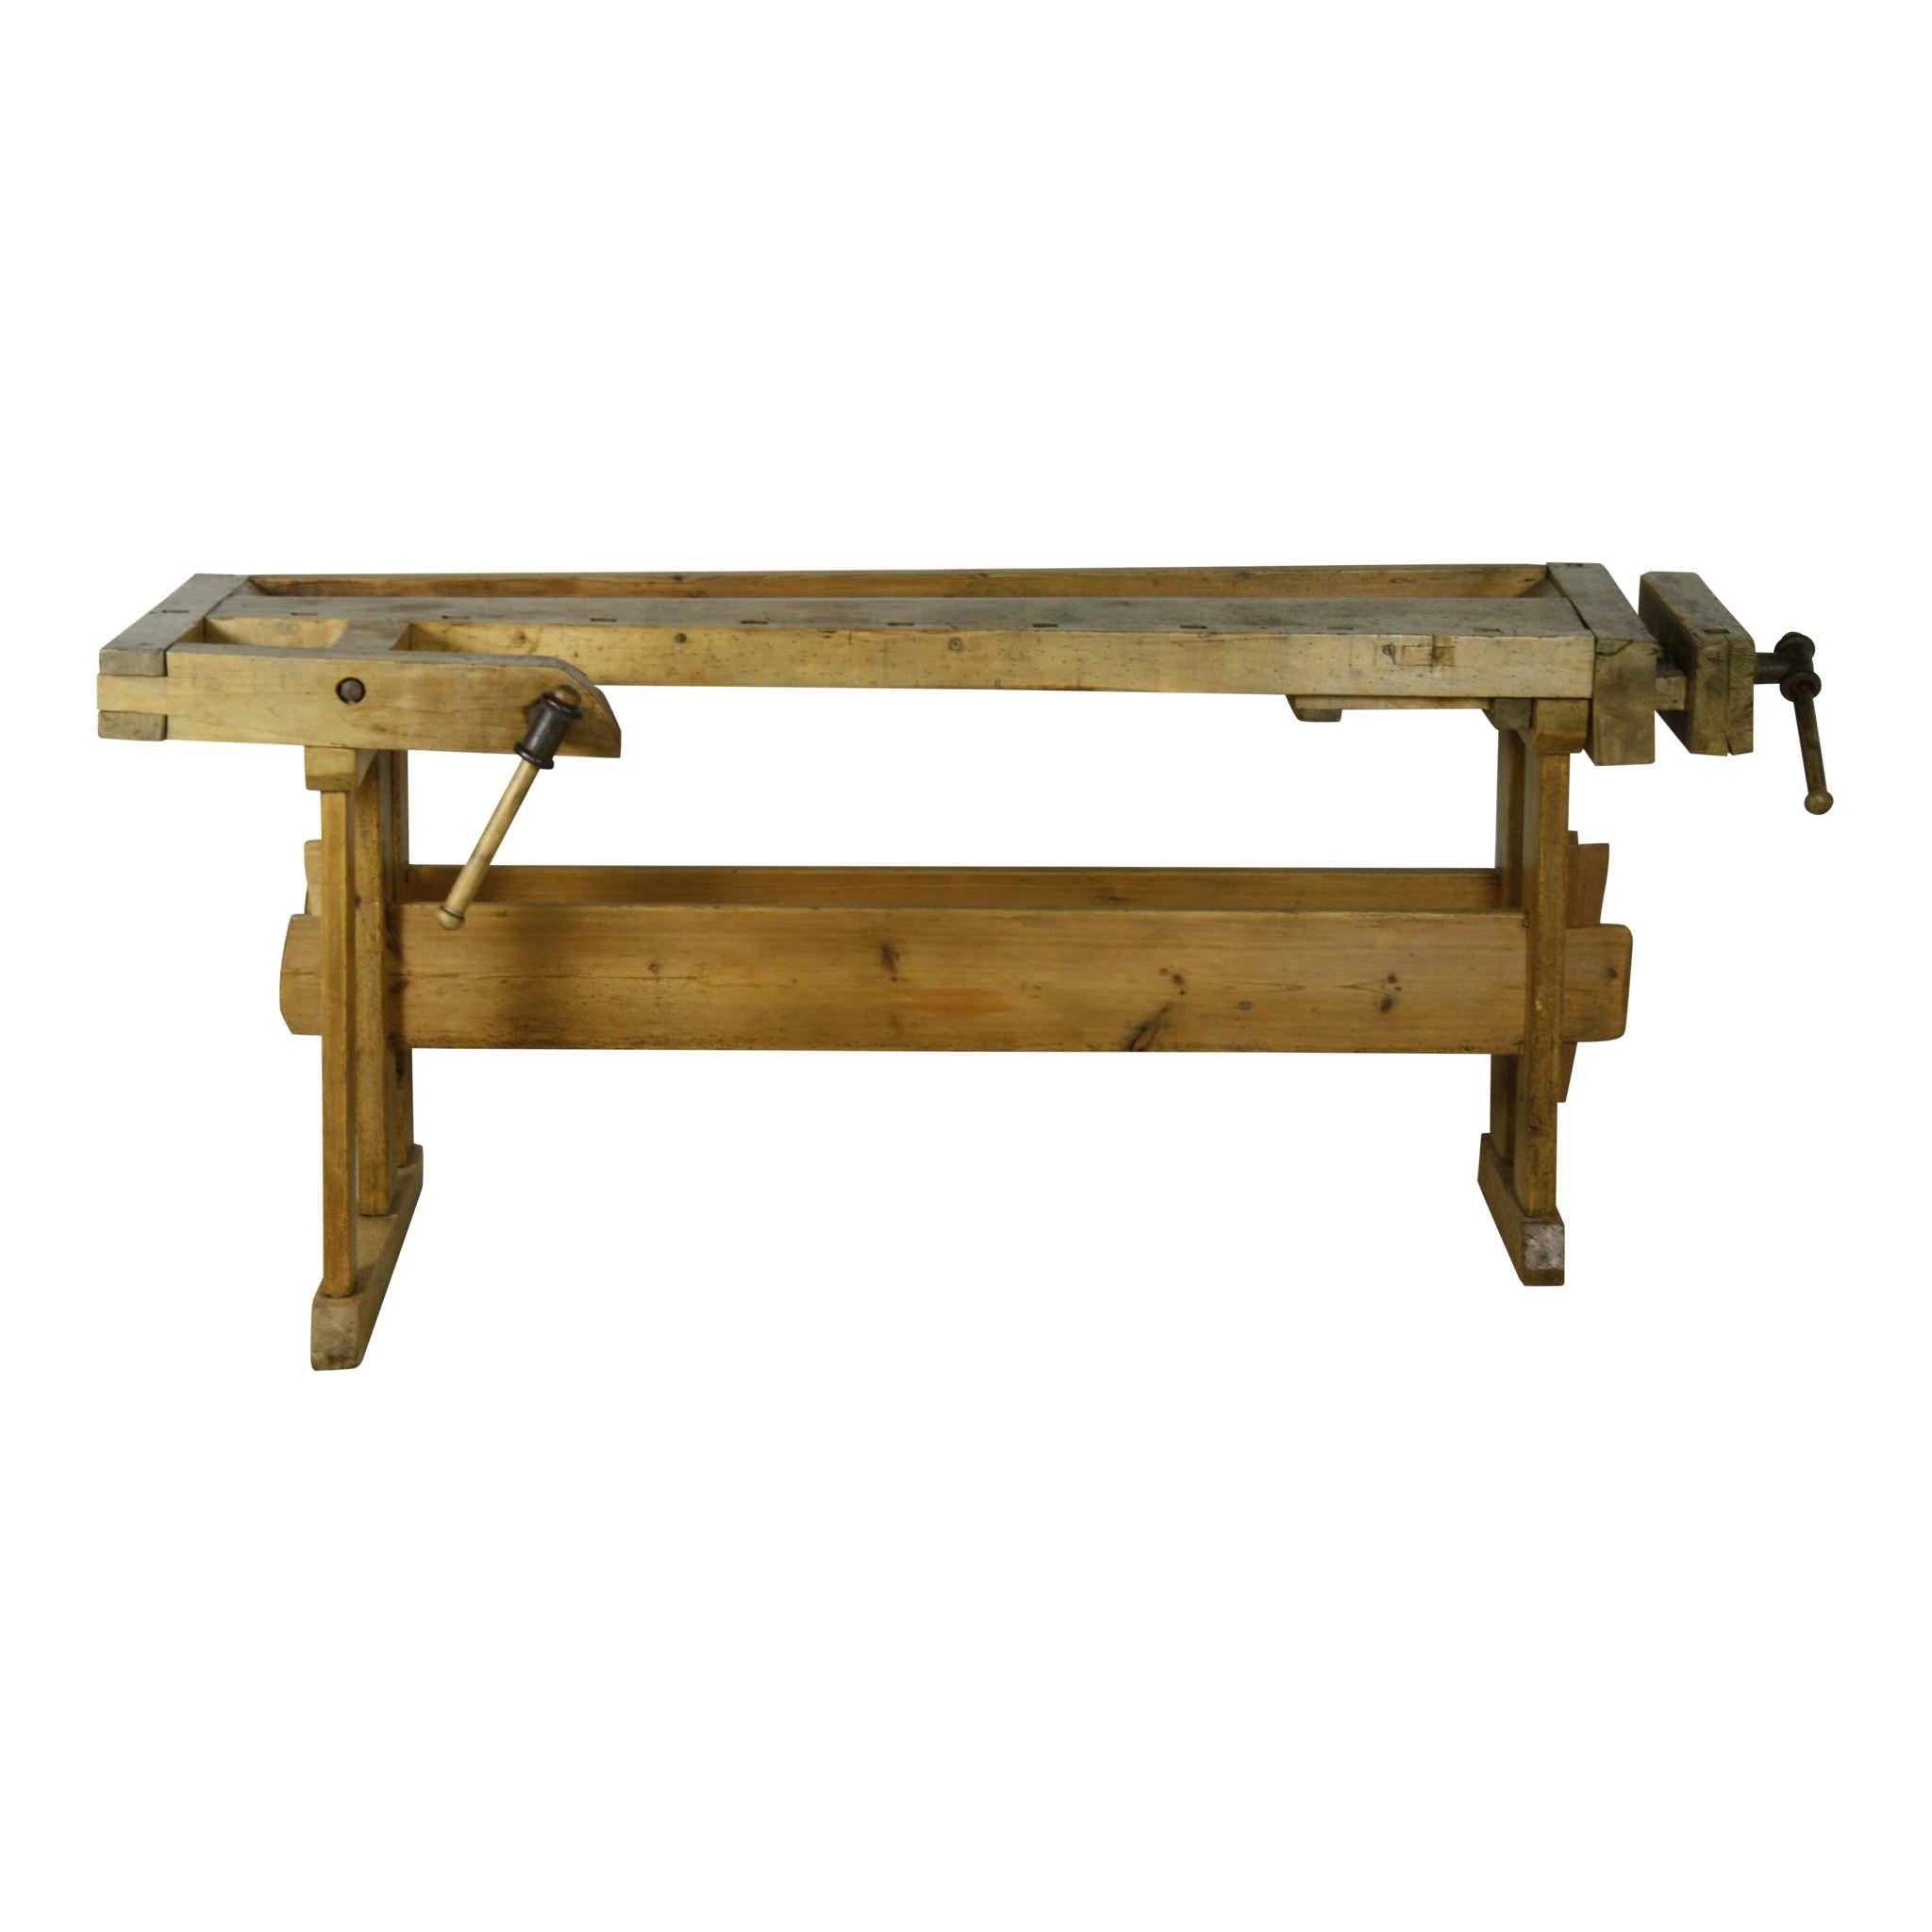 Designed for a woodworking craftsman, this pine workbench has two vises: one on the front or face and another on the end or tail. The left side position of the end vise and the right side position of the face vise suggest that this bench was created